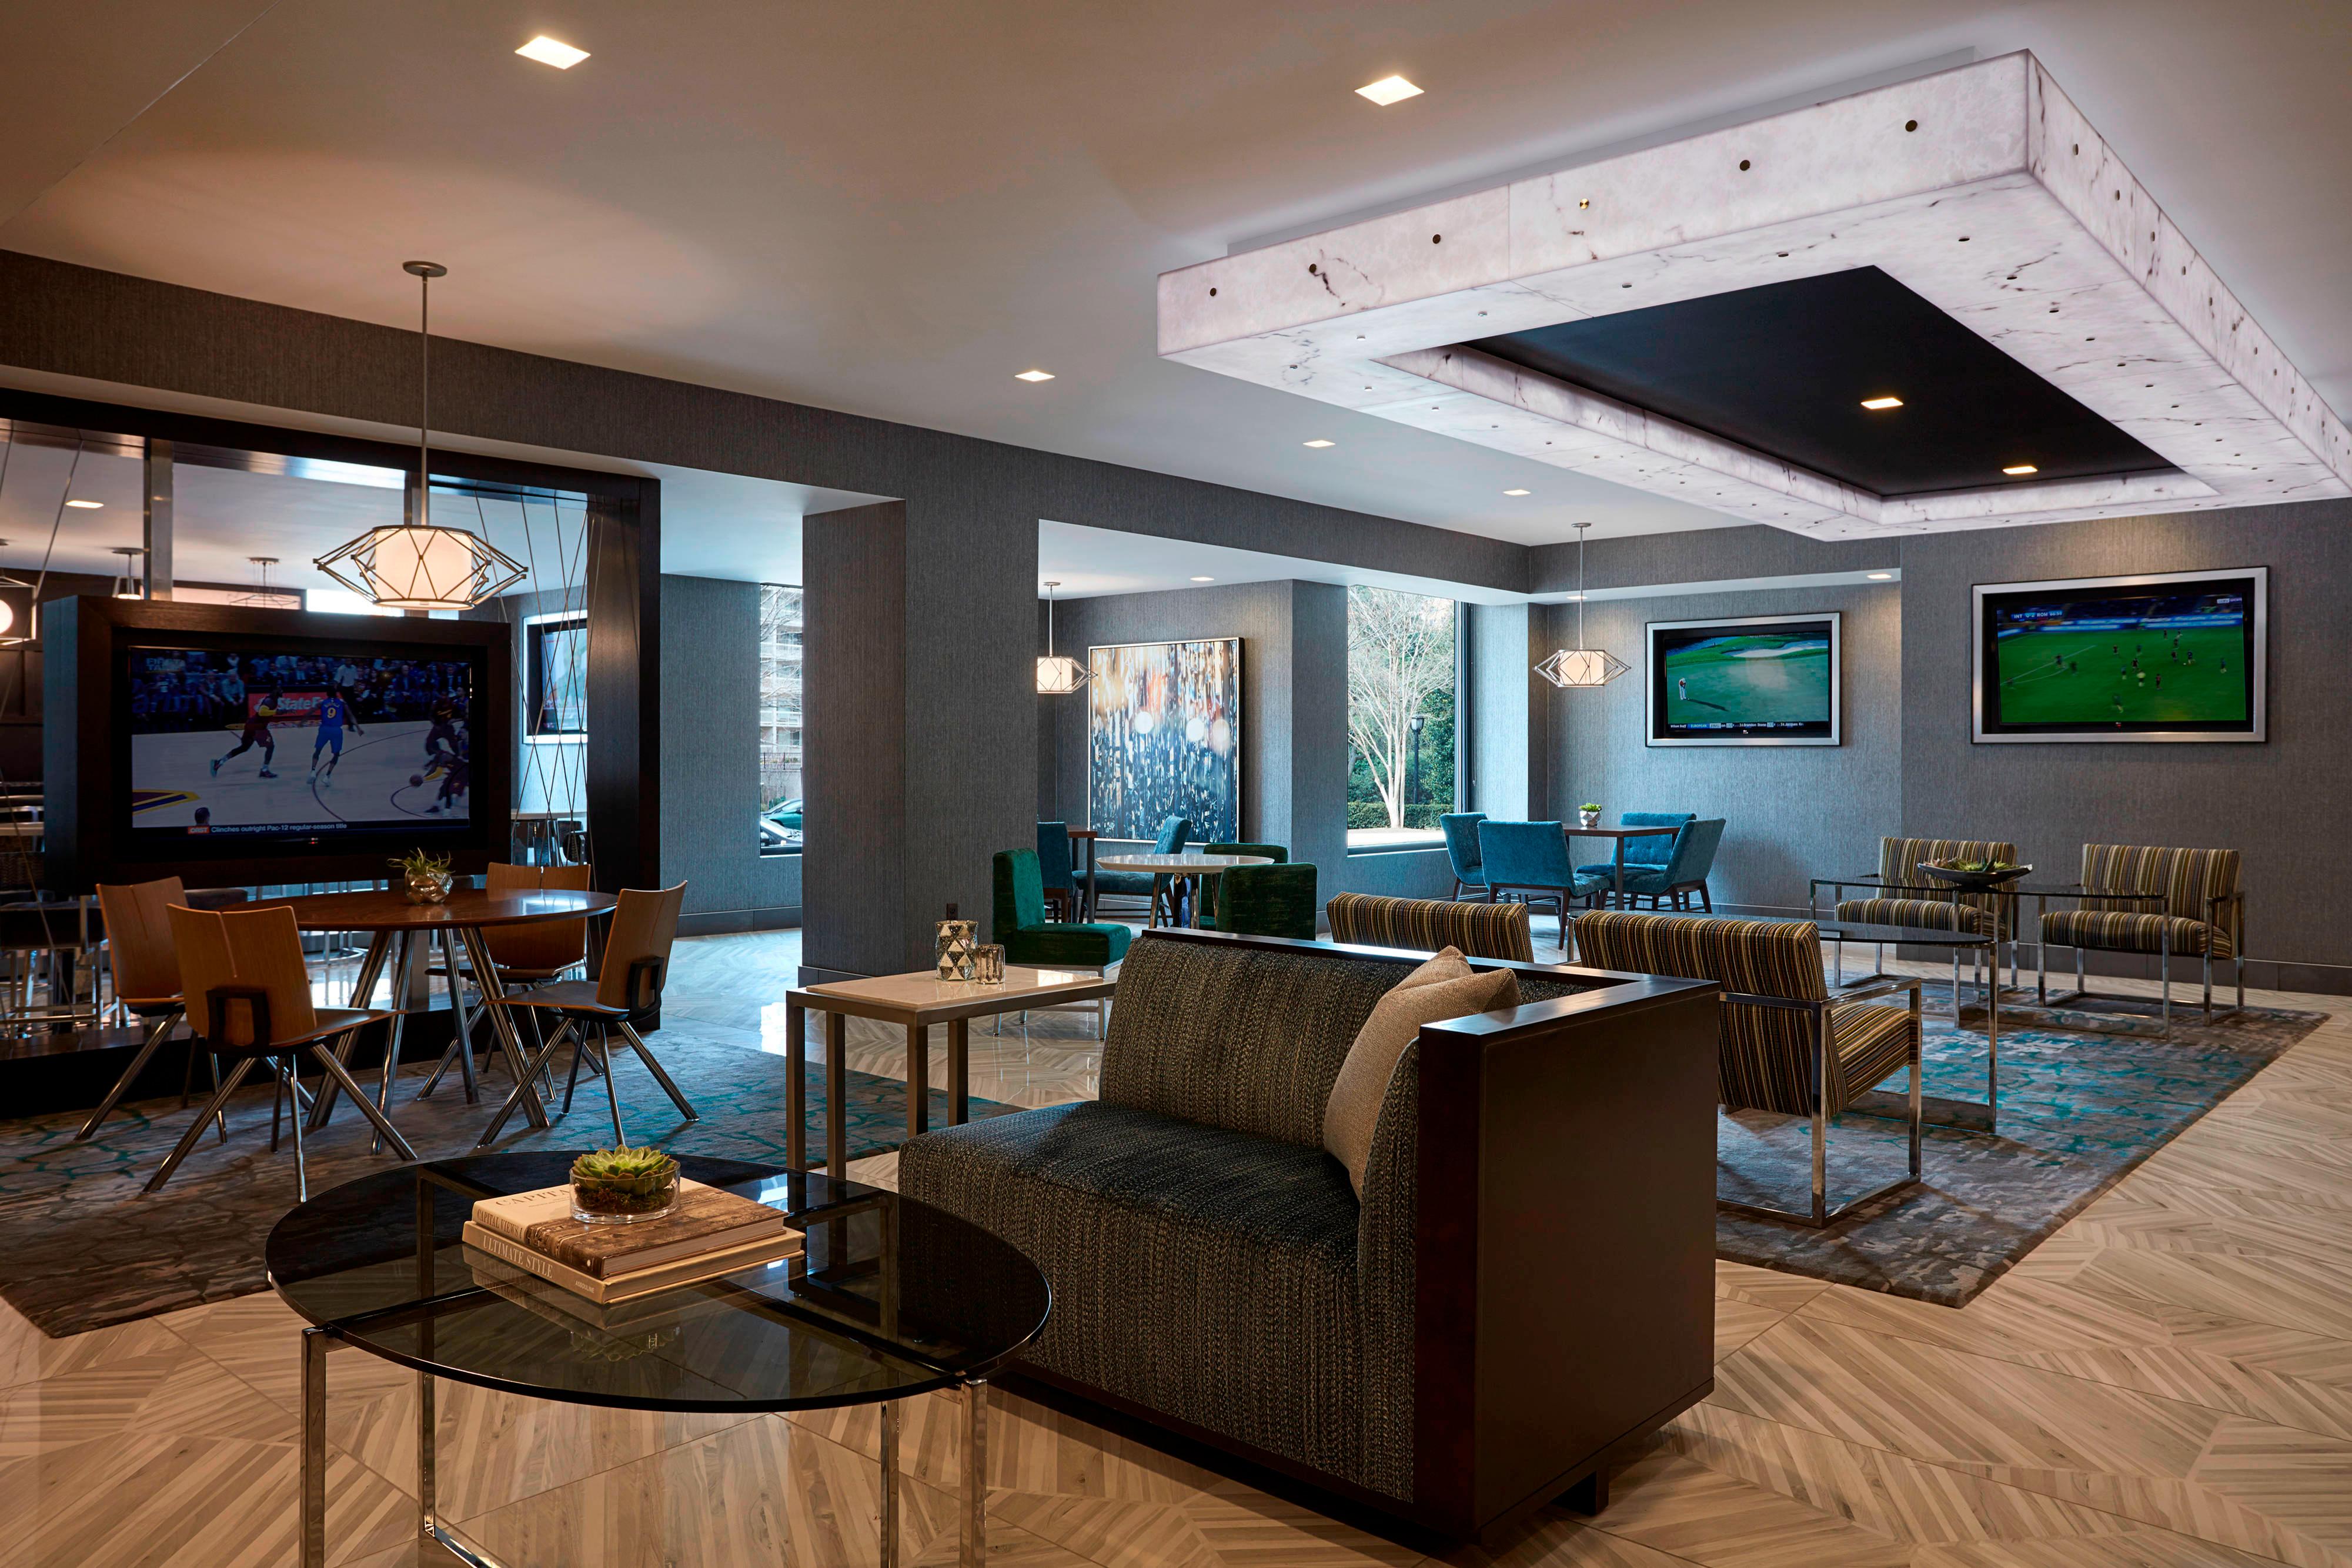 Lounge area with upholstered chairs and flatscreen TVs on walls